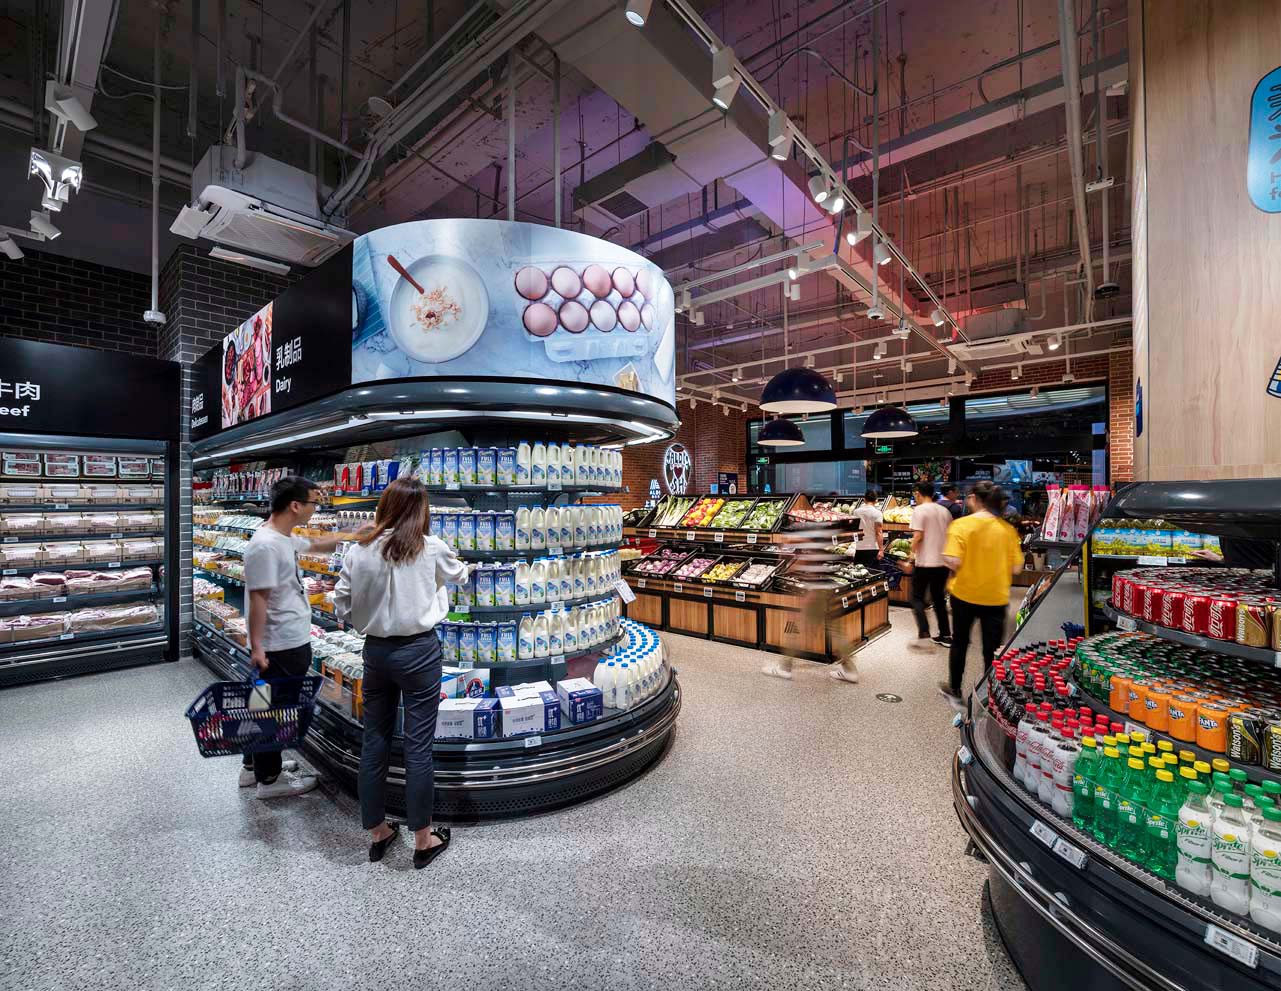 Award-winning supermarket and grocery store interior design concepts - Aldi China